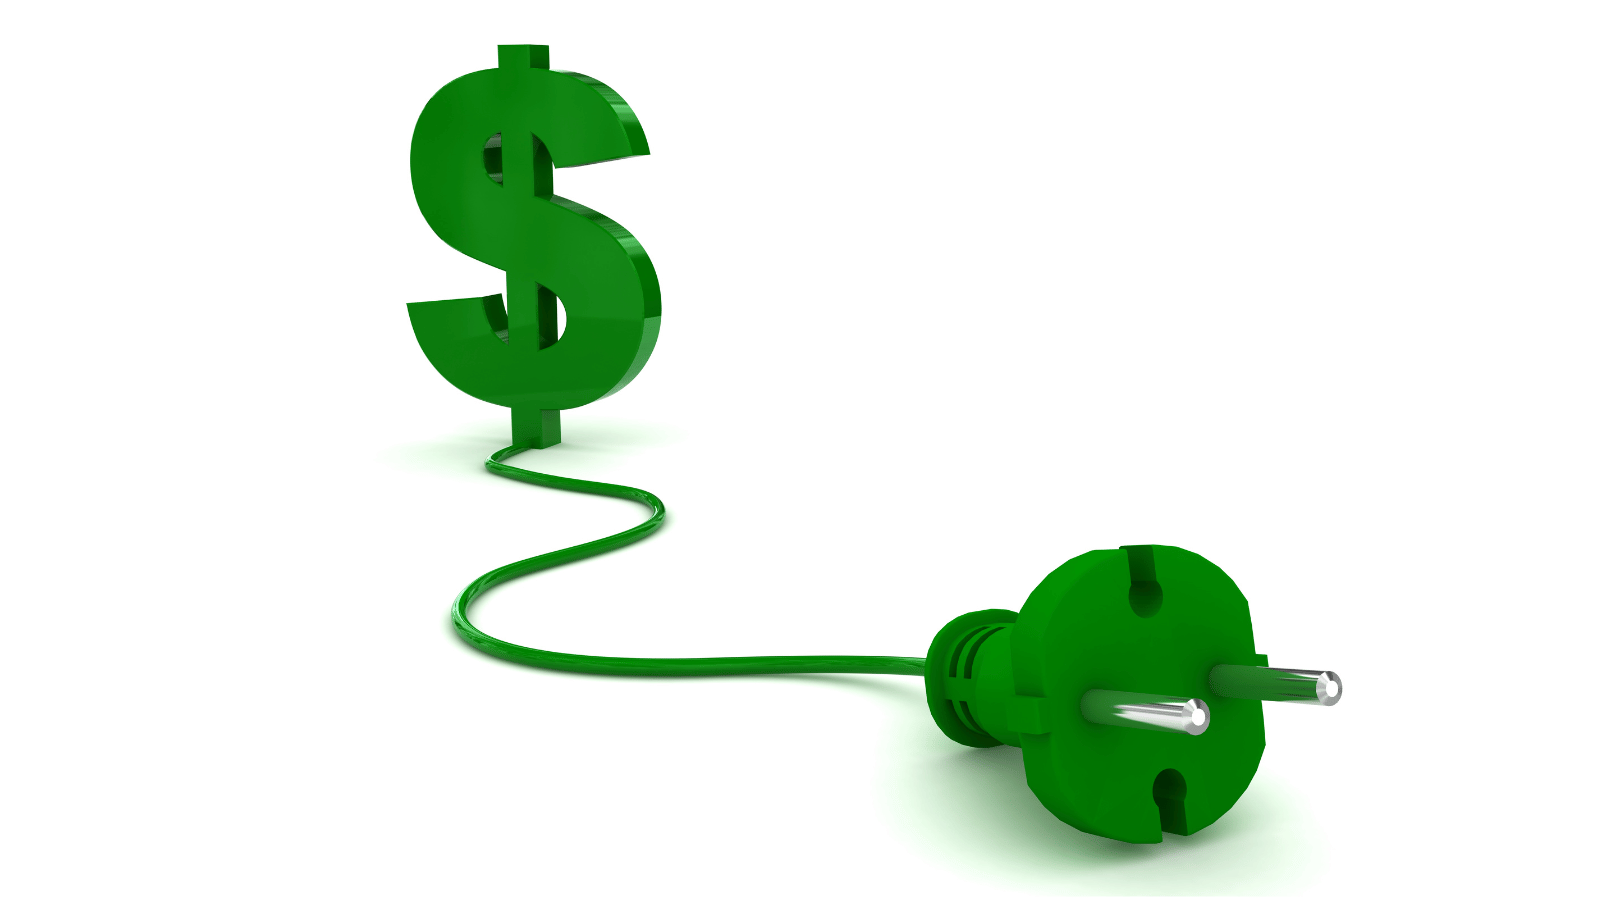 Illustration of green dollar sign attached to a green plug and a cord